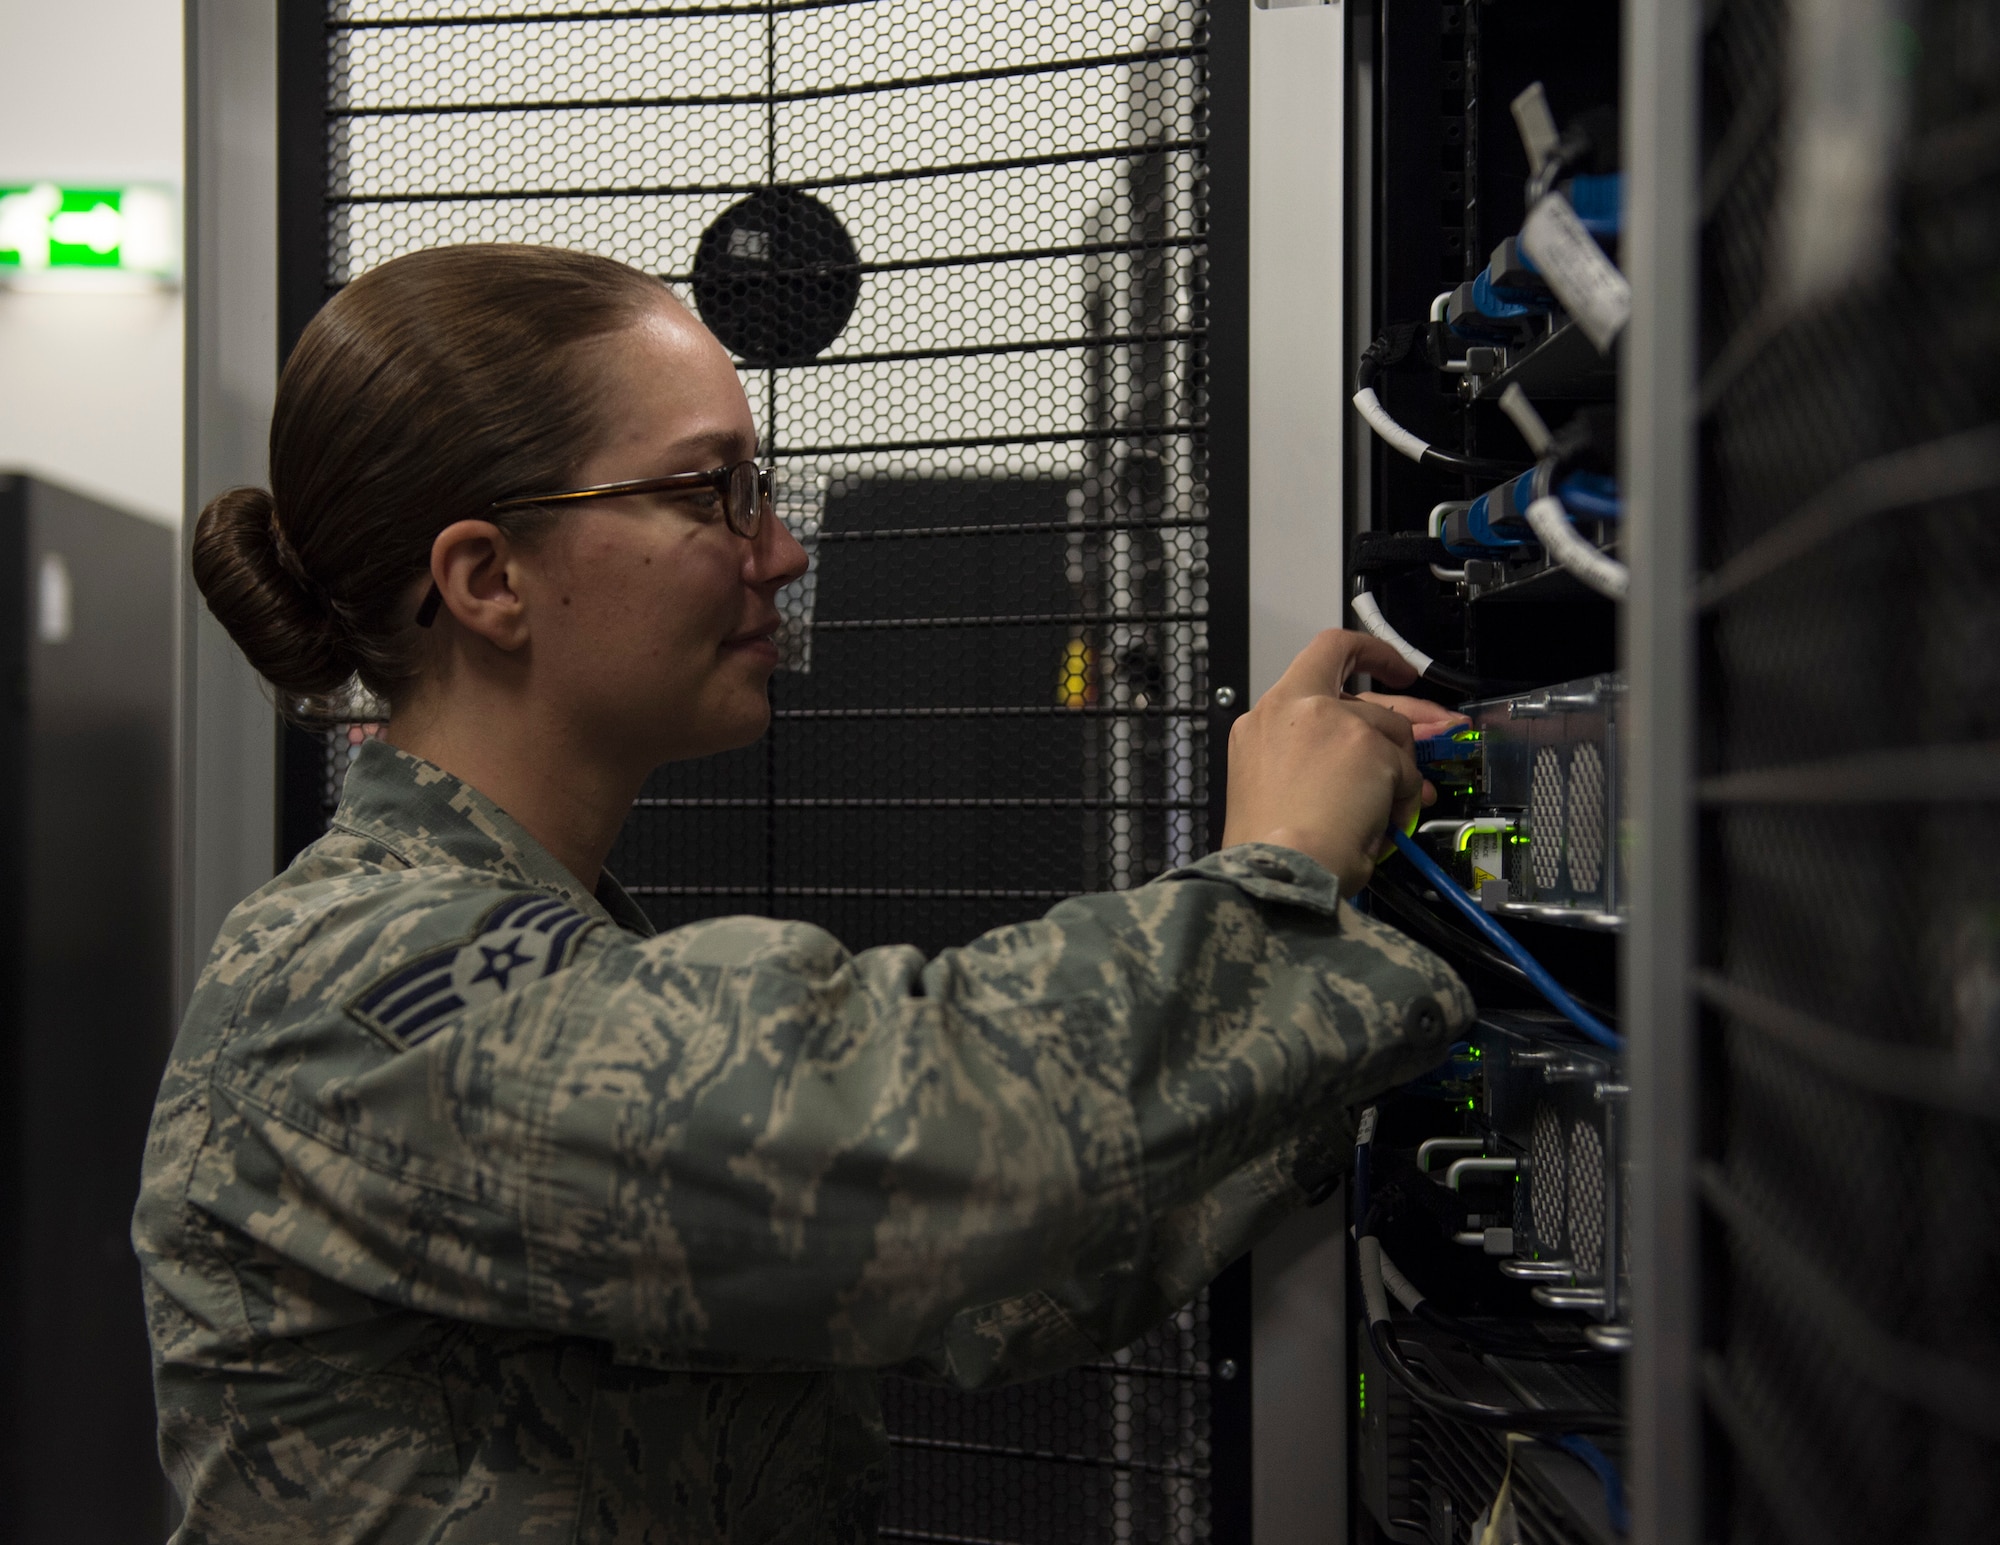 U.S. Air Force Staff Sgt. Shelby Carter, 379th Expeditionary Communication Squadron, checks a network server at Al Udeid Air Base, Qatar, July 14, 2017. Carter is part of a team of Airmen which are responsible for installing and supporting all network servers ensuring they are operational and secure from outside intrusion. (U.S. Air Force photo by Tech. Sgt. Amy M. Lovgren)